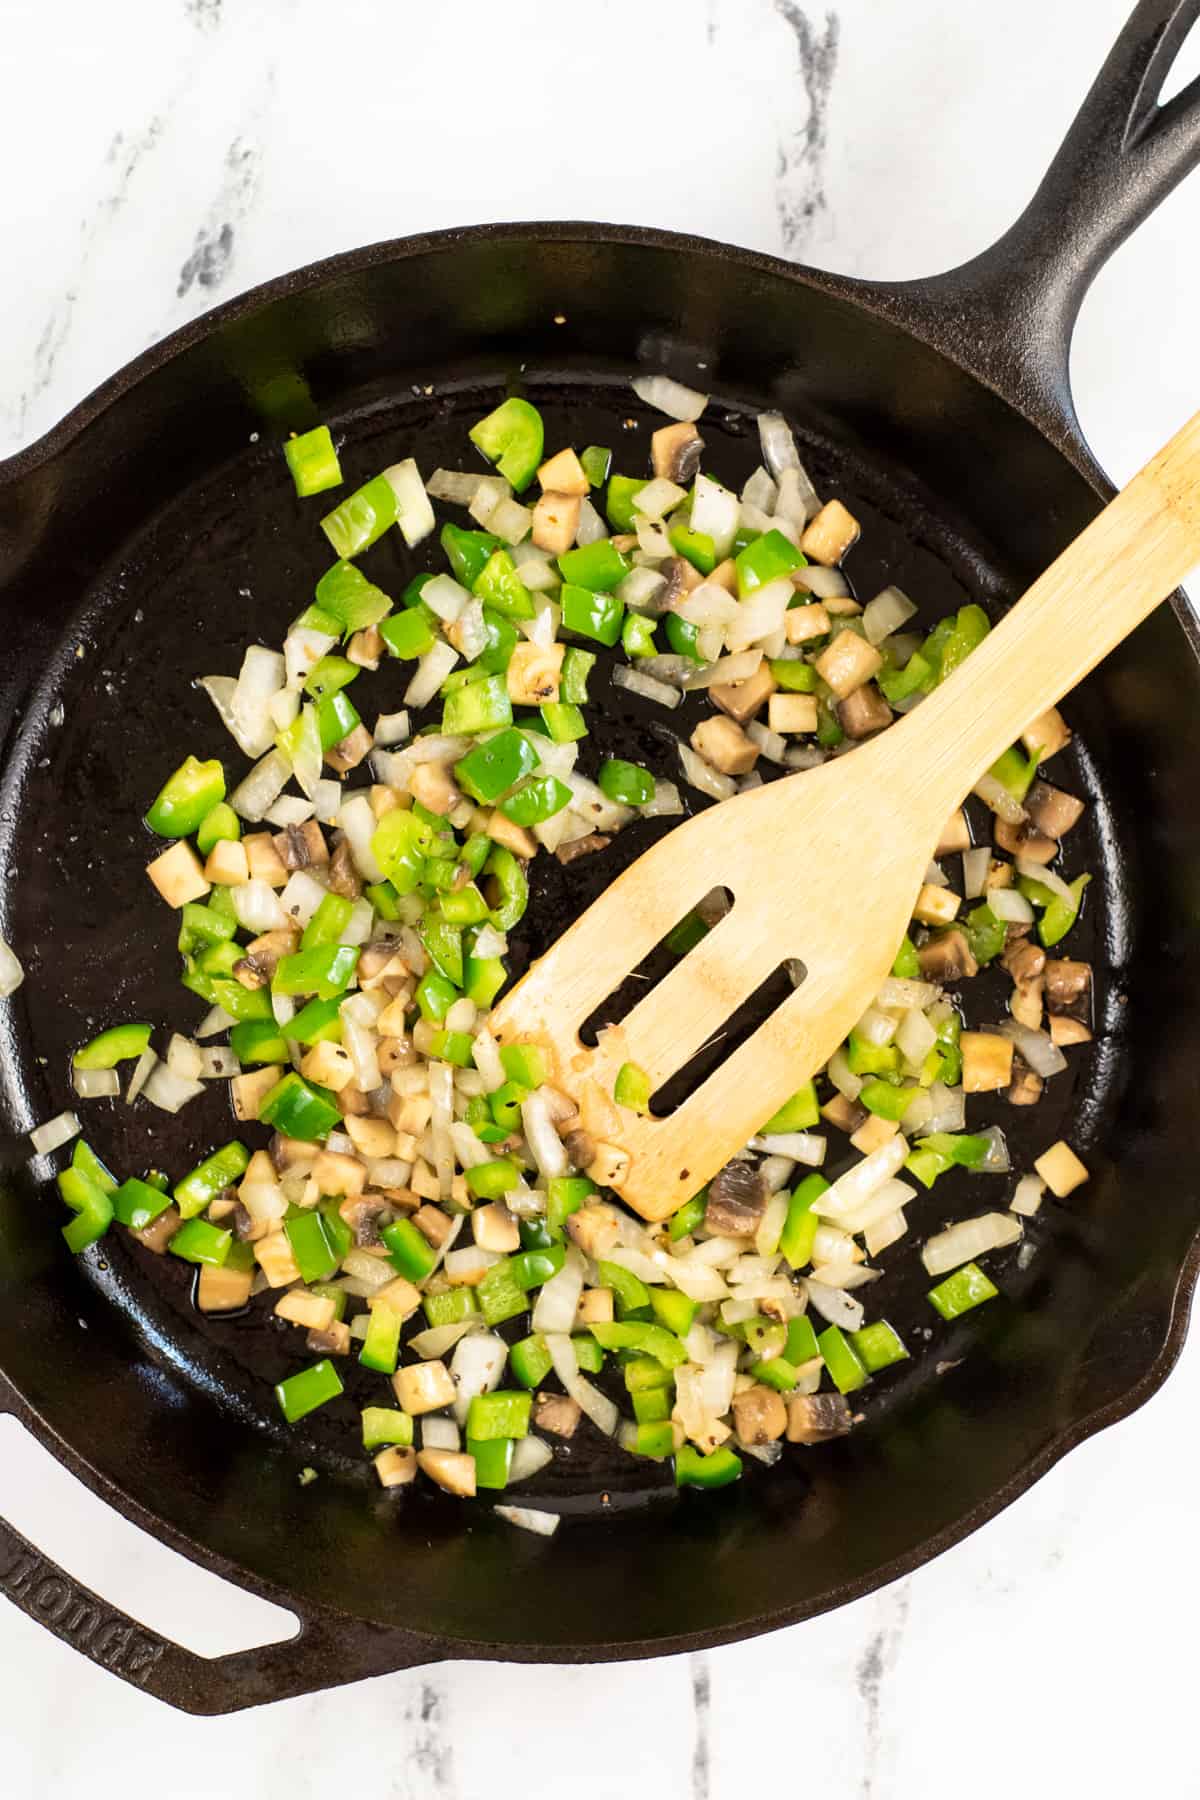 Chopped green peppers, onion, and mushrooms in skillet